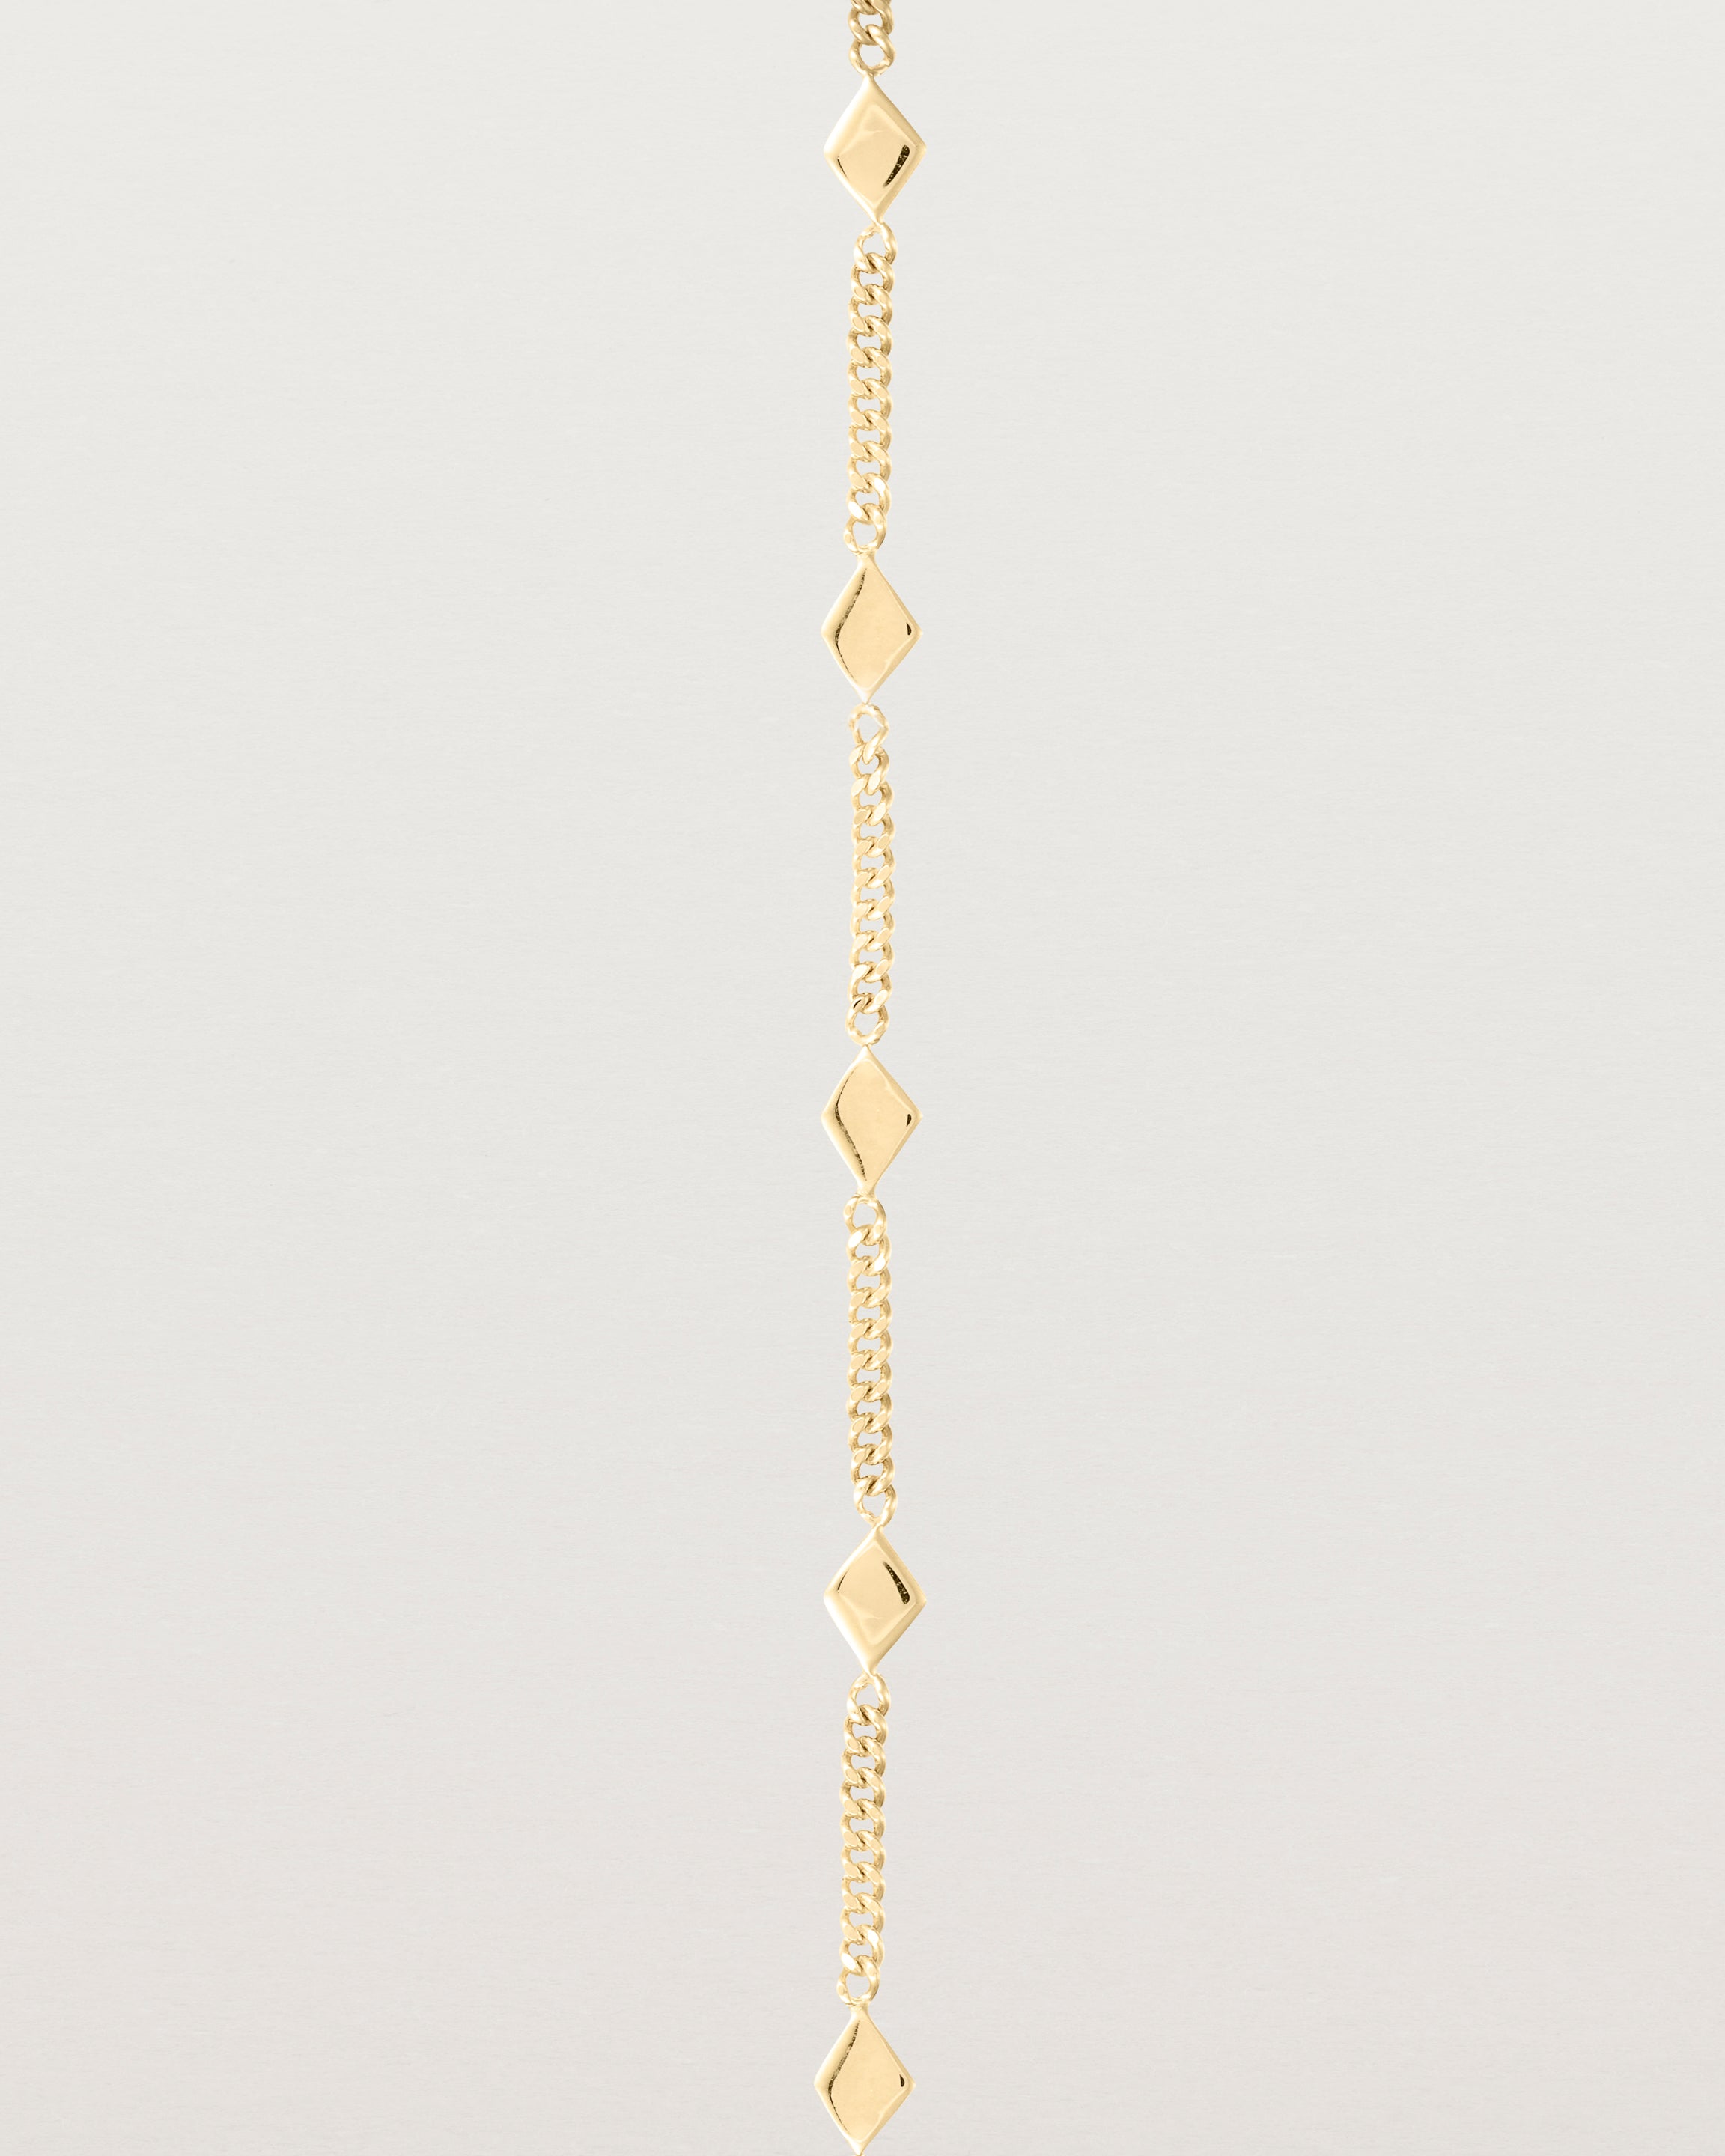 Close up of the Nuna Charm Bracelet in Yellow Gold.